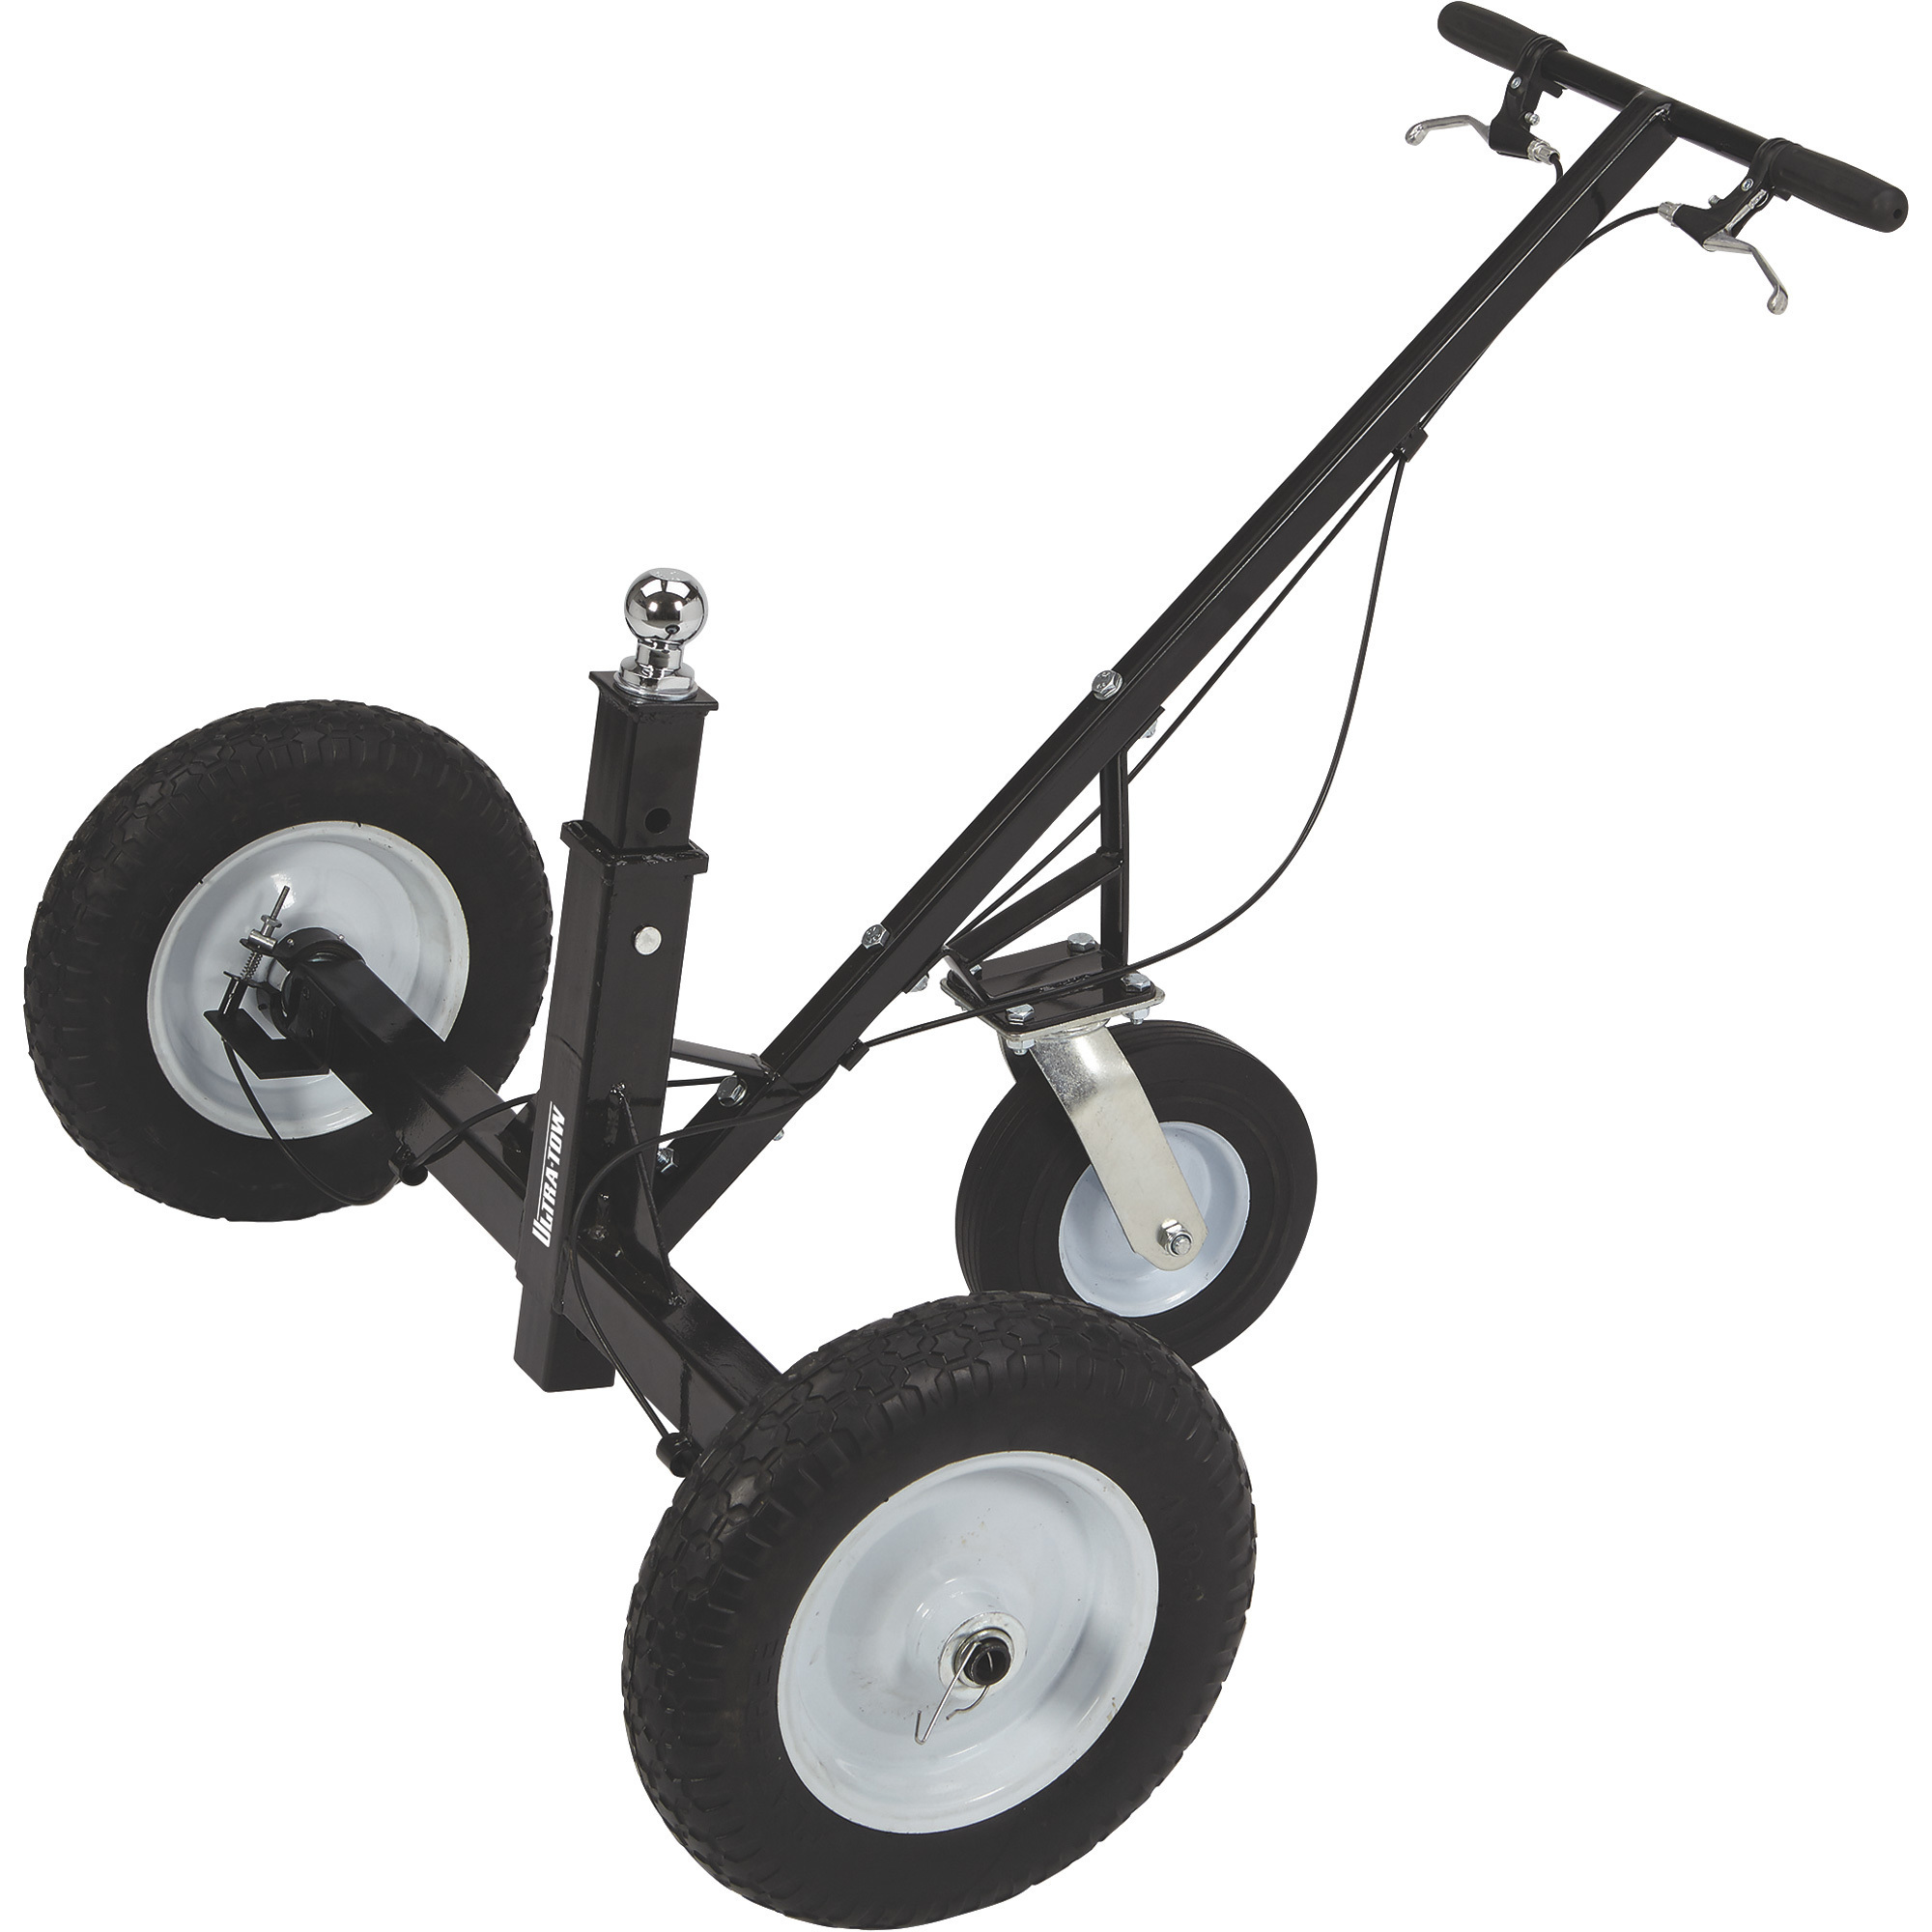 Ultra-Tow Heavy-Duty Adjustable Trailer Dolly with Brake â 1000-Lb. Capacity